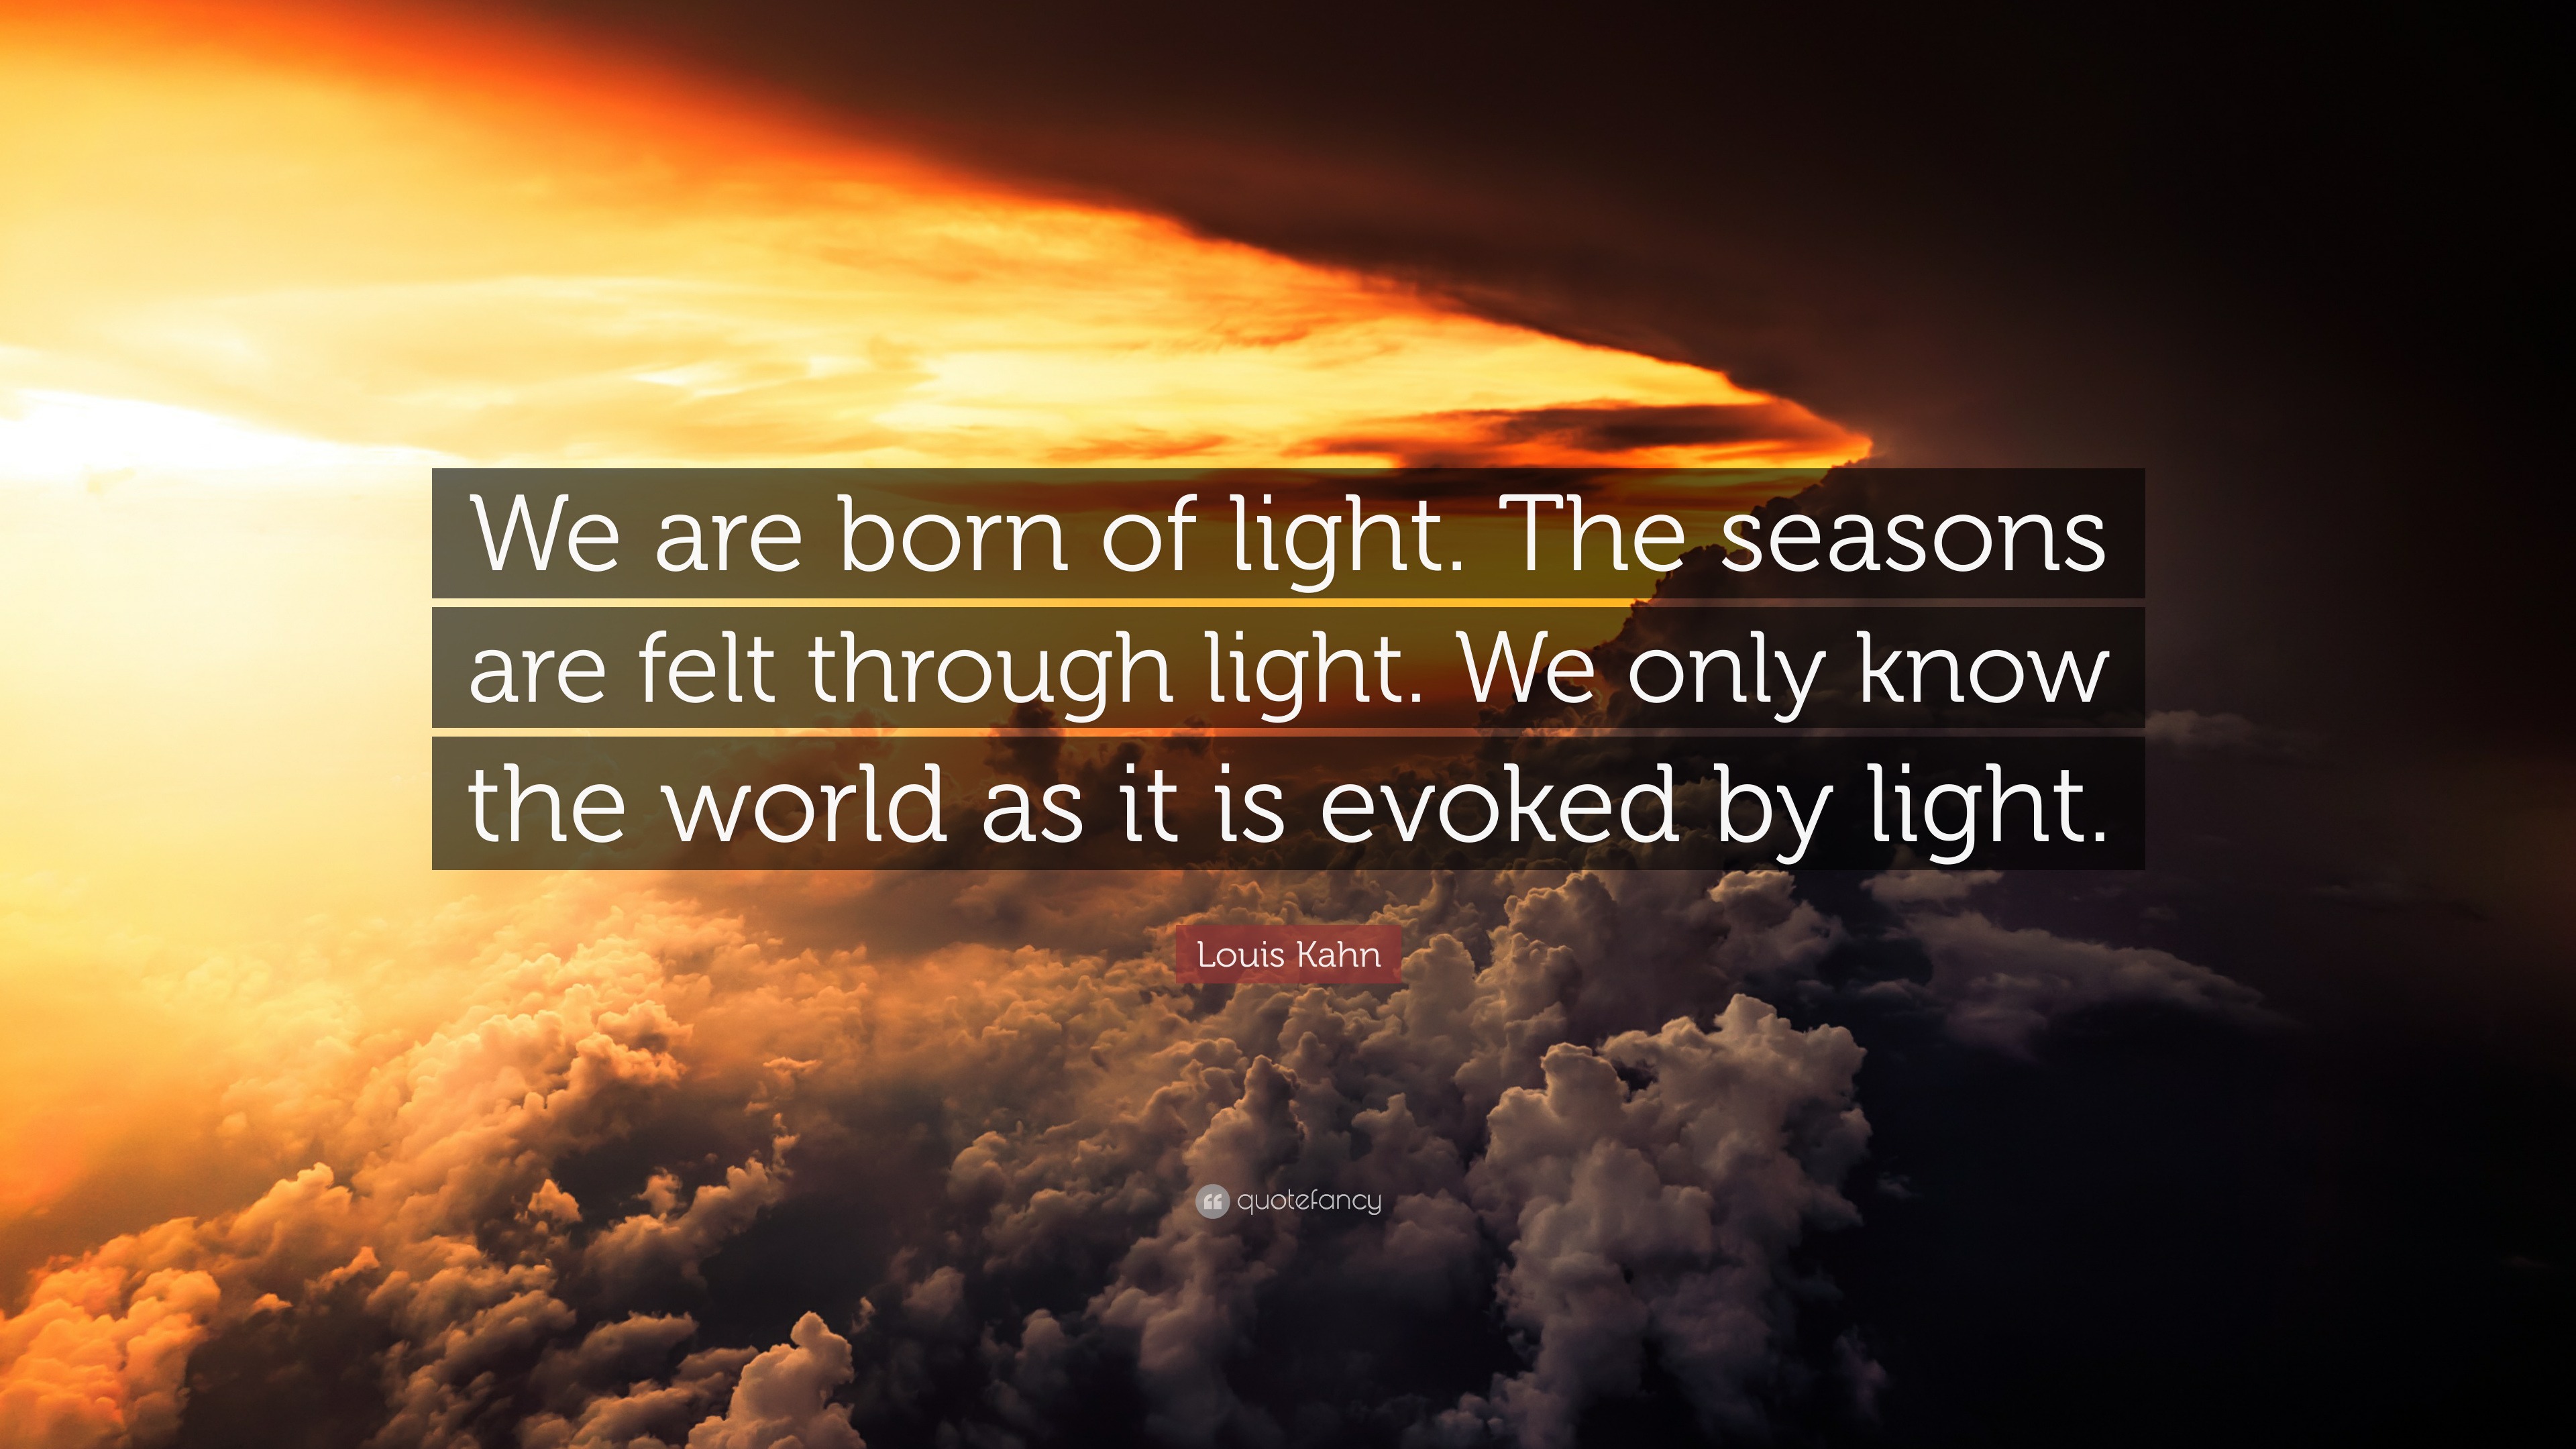 Louis Kahn Quote: “We are born of light. The seasons are felt through ...